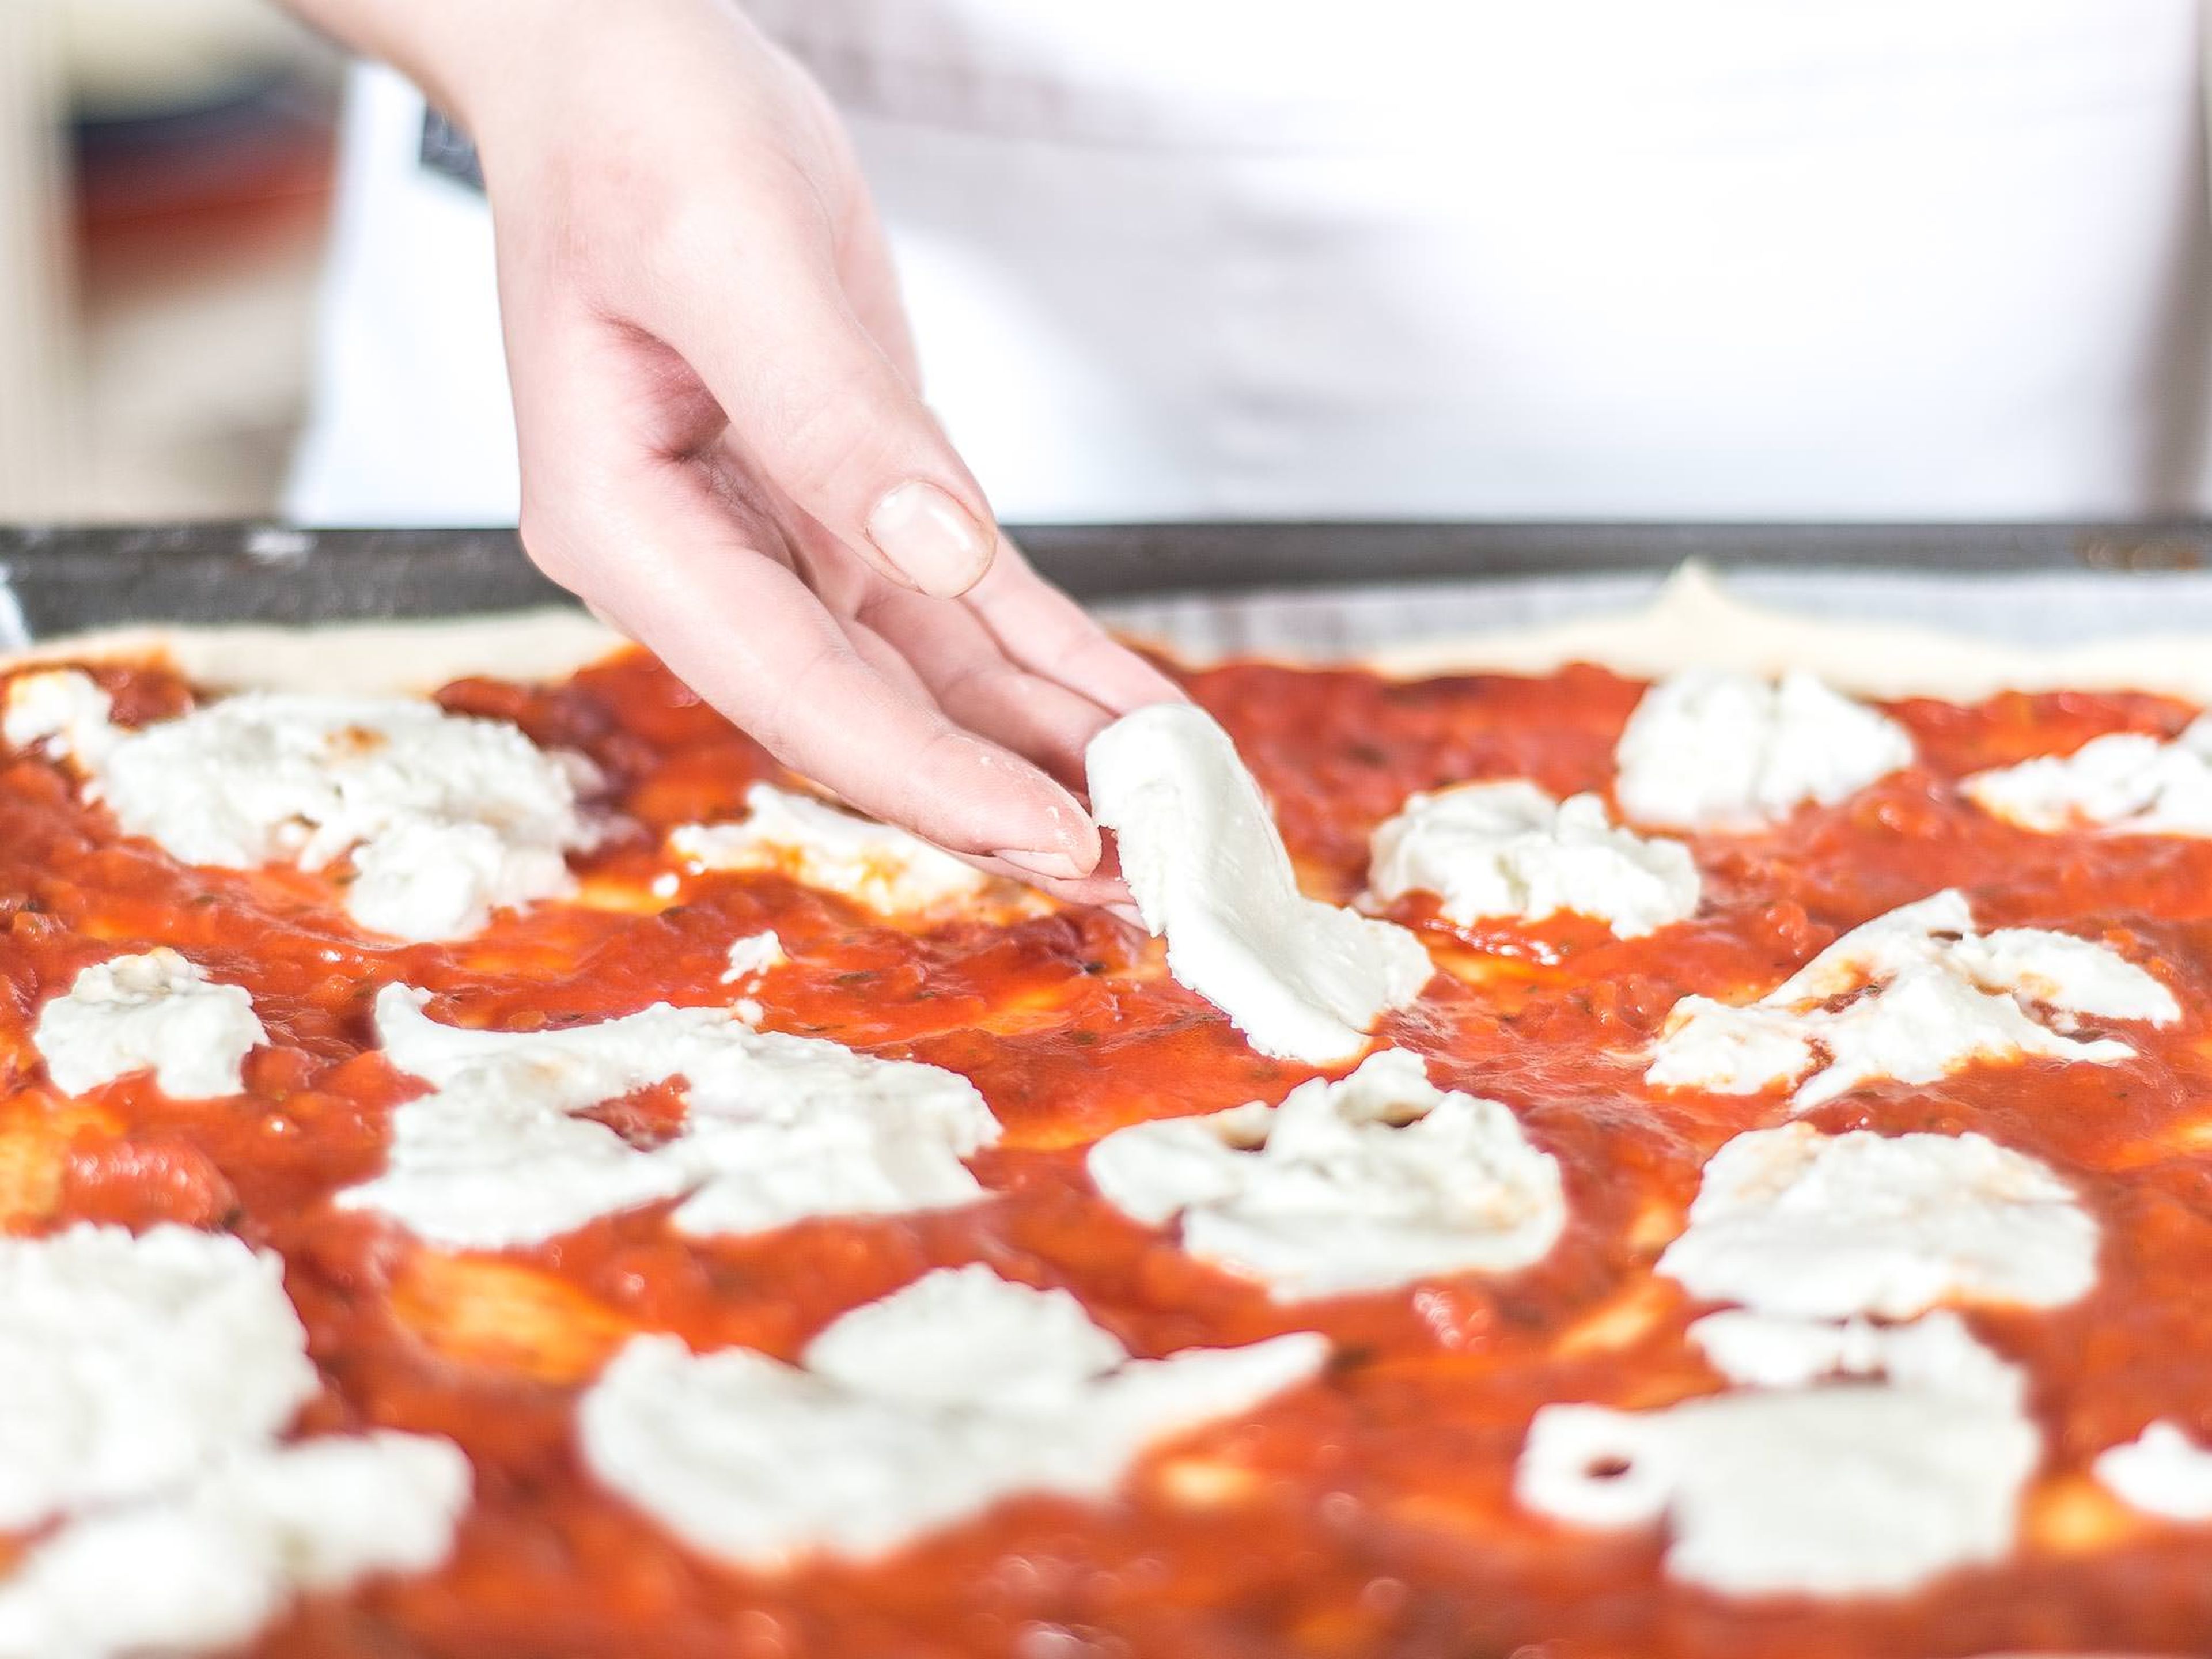 Now, cut the mozzarella into slices and place them evenly across the pizza. Then, bake the pizza in a preheated oven at 180°C/355°F for approx. 20–25 min. until golden brown.